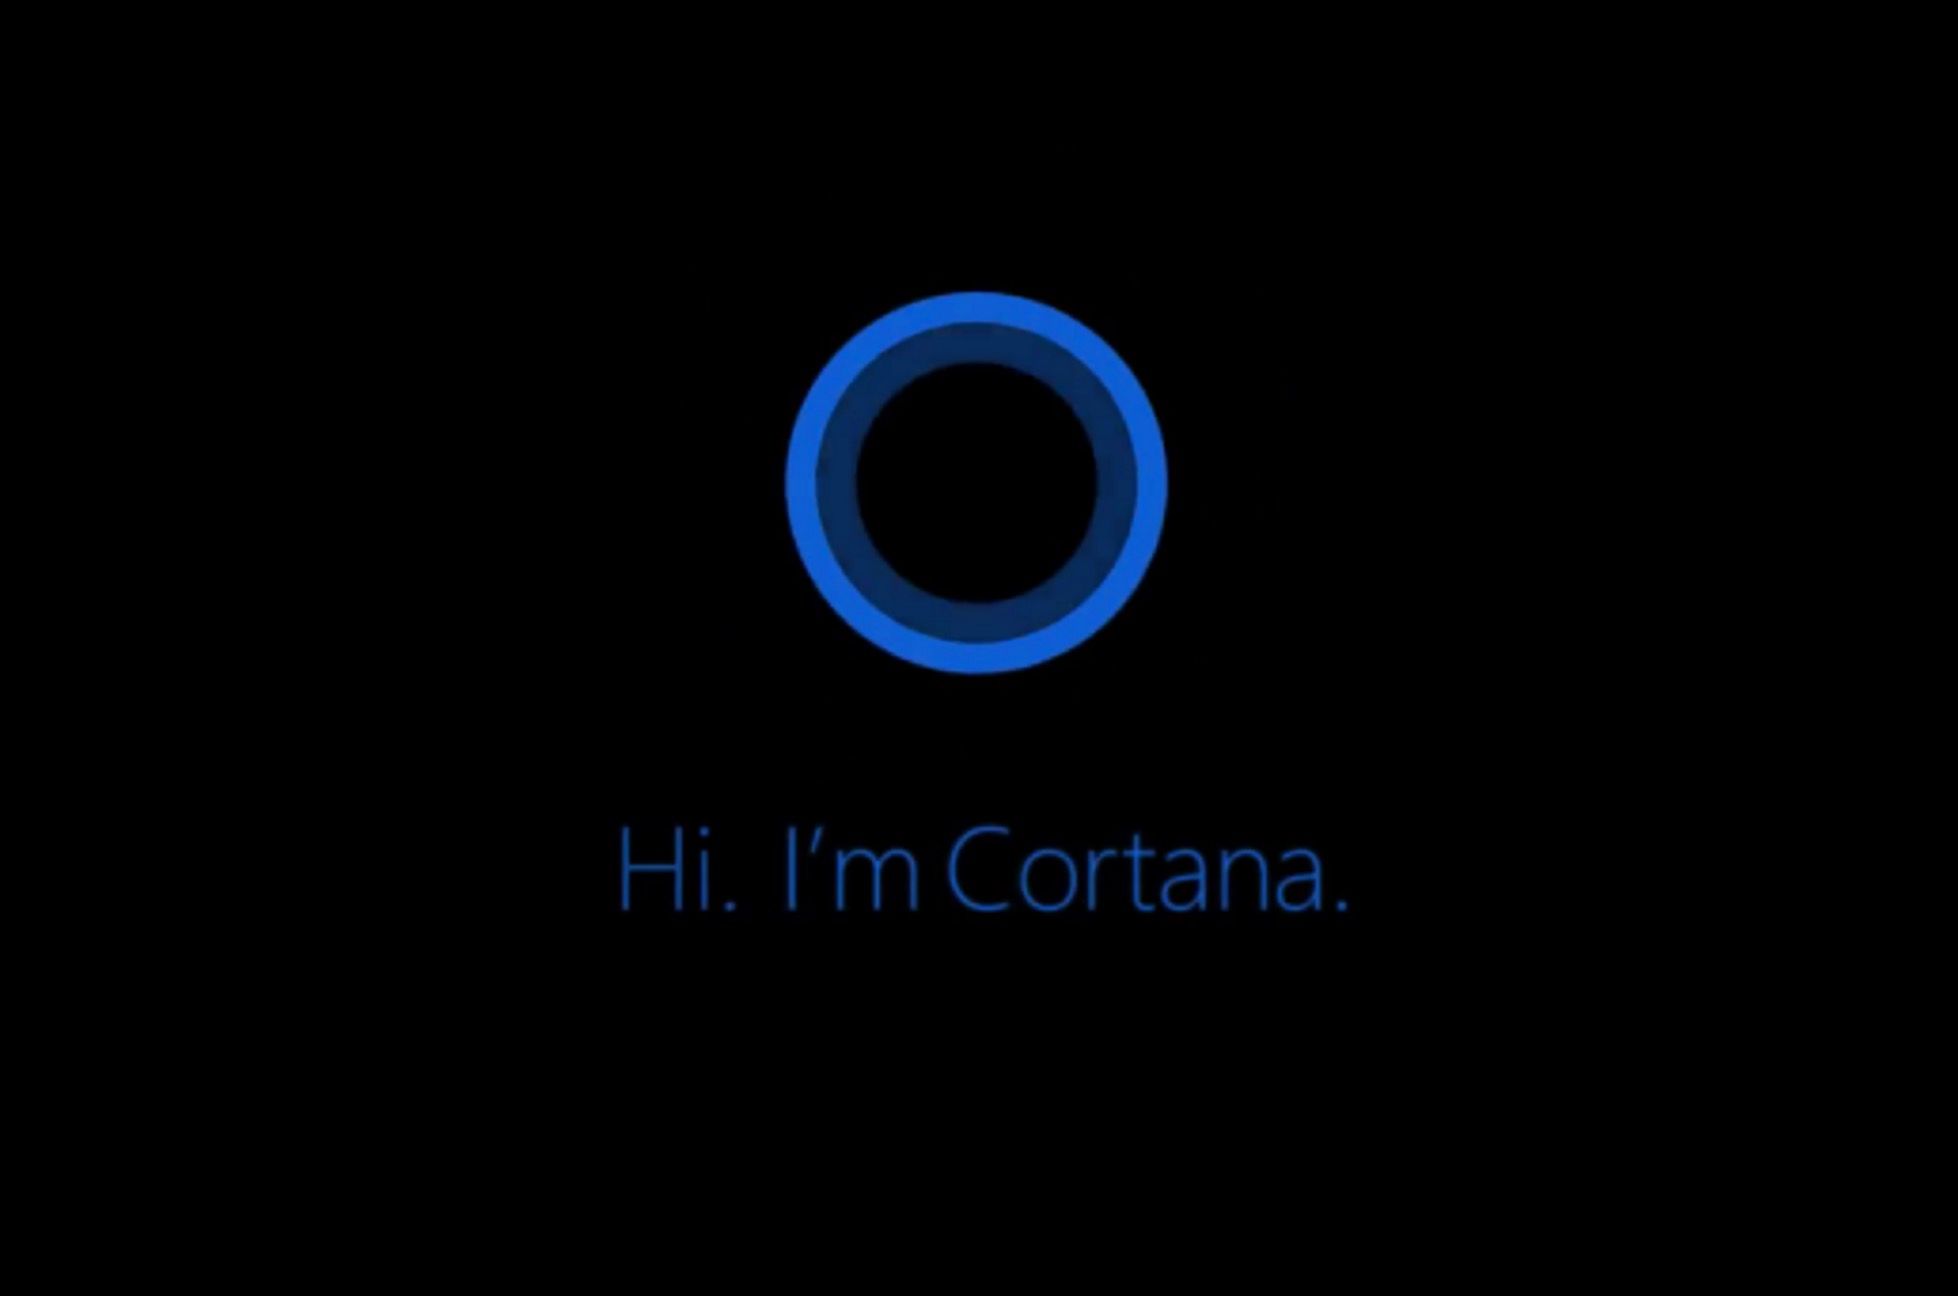 microsoft s cortana assistant is officially available for android and ios image 1